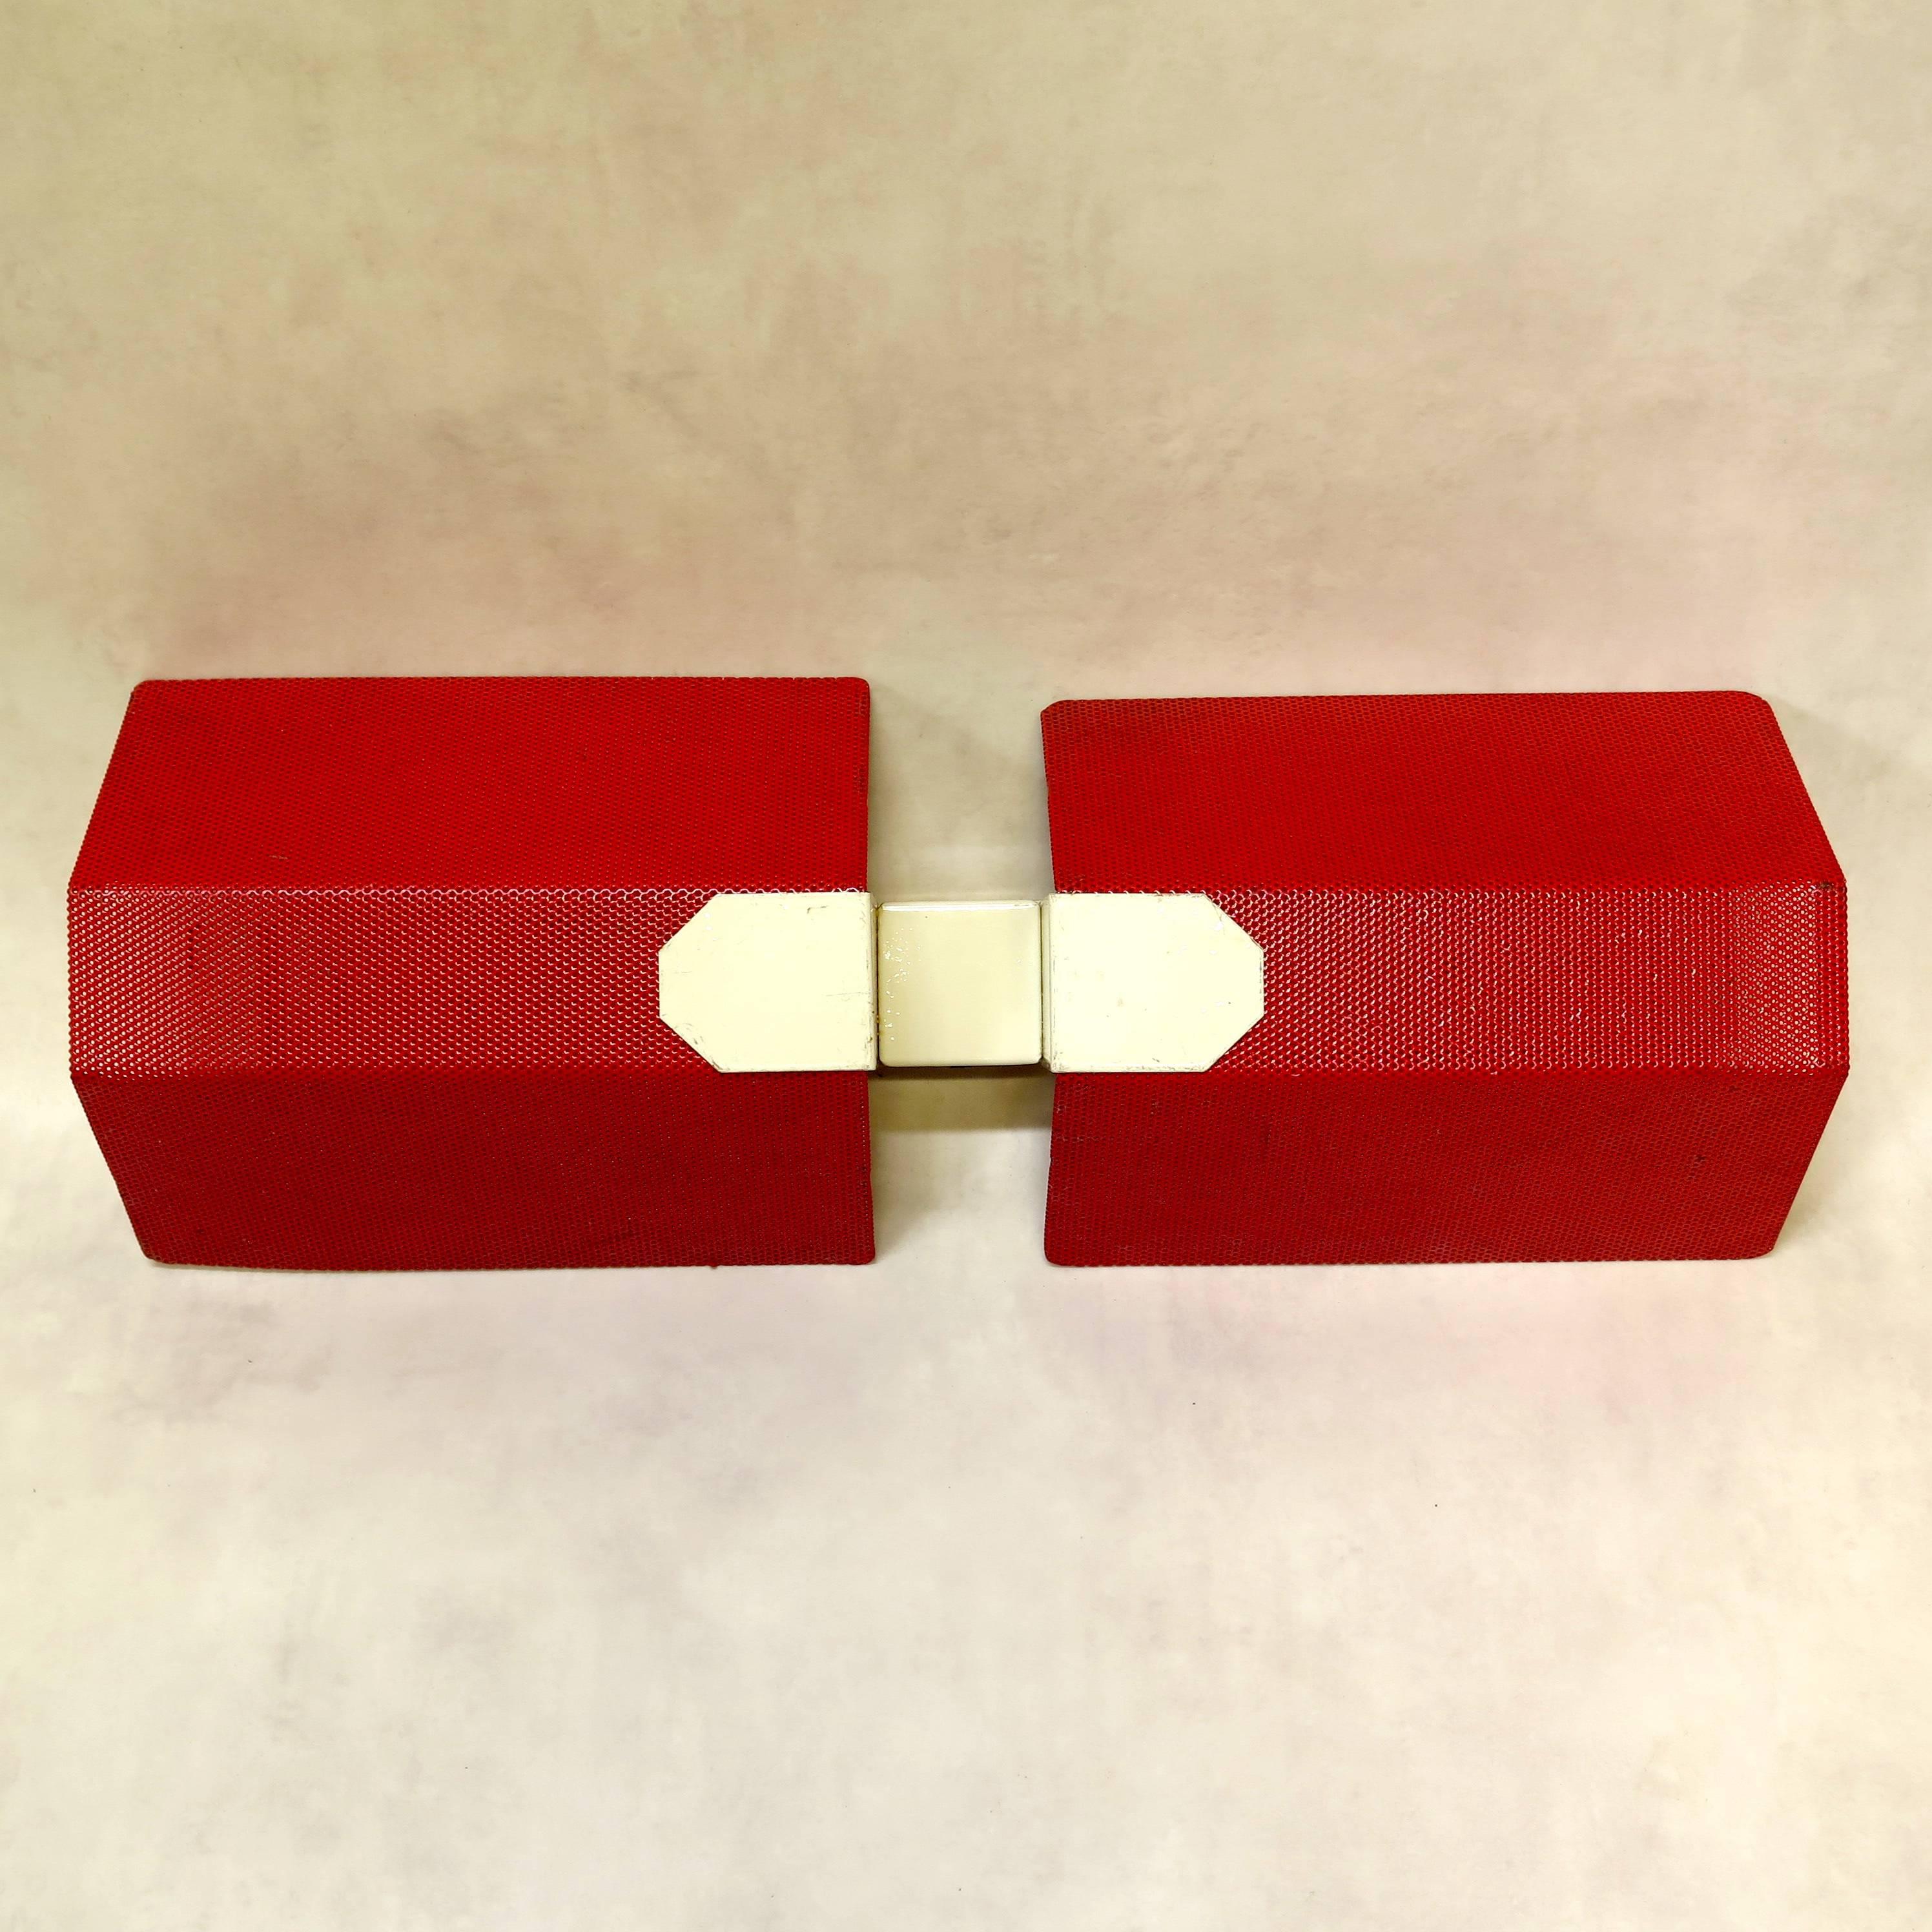 Fabulous set of nine red and off-white lacquered wall lights in the style of Mathieu Matégot. Each sconce holds two bulbs, one uplighter and one down lighter. Can be used horizontally as well. 

Nice, graphic bow design.